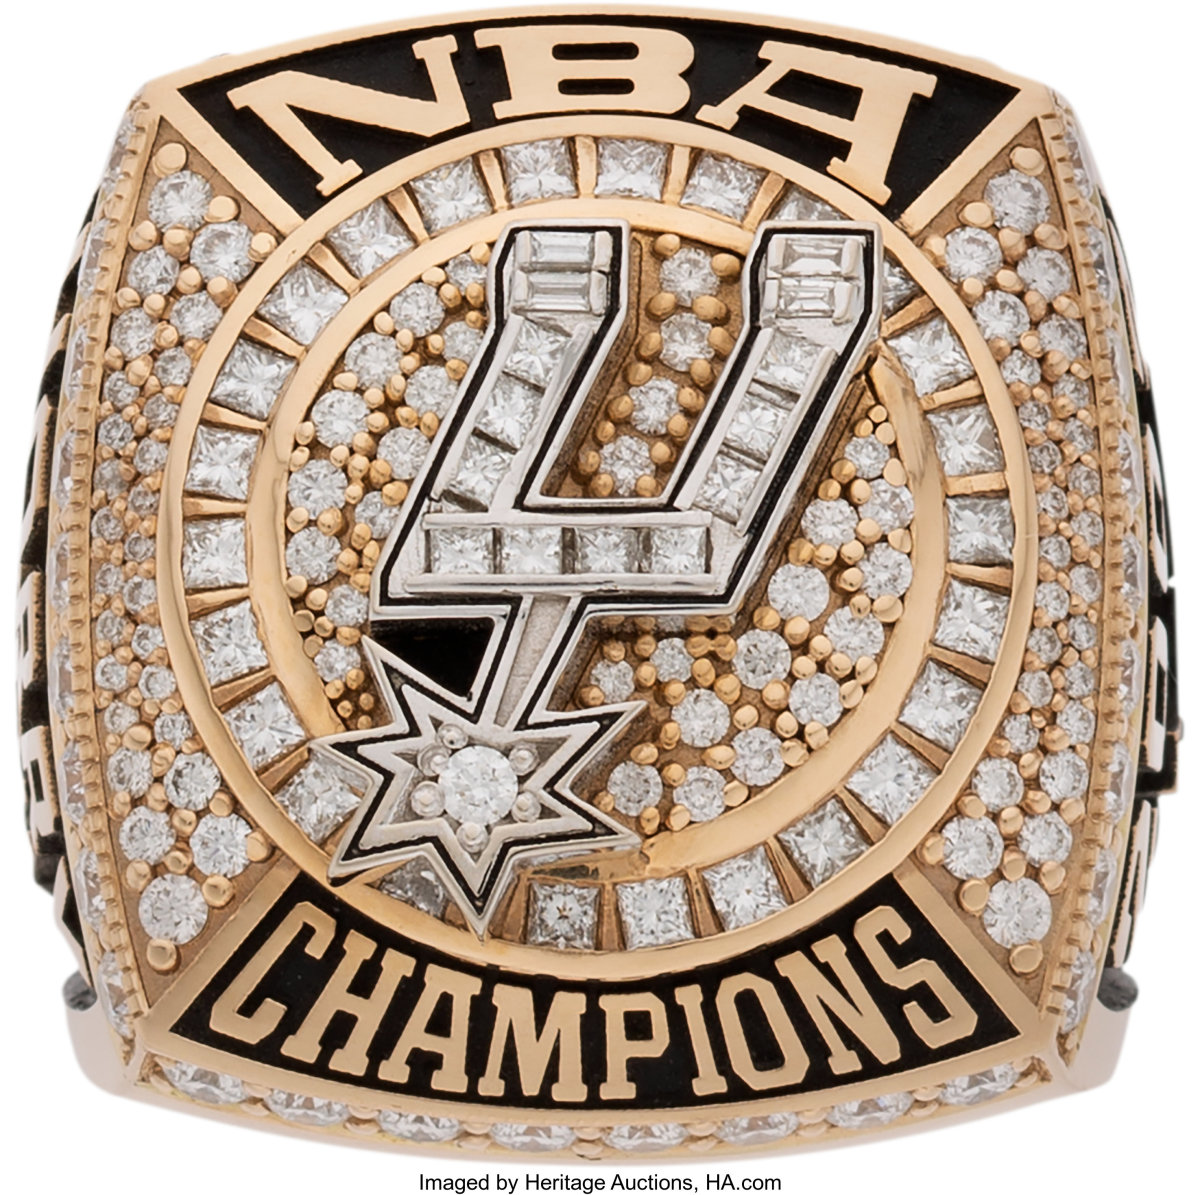 Robert Horry's ring for sale